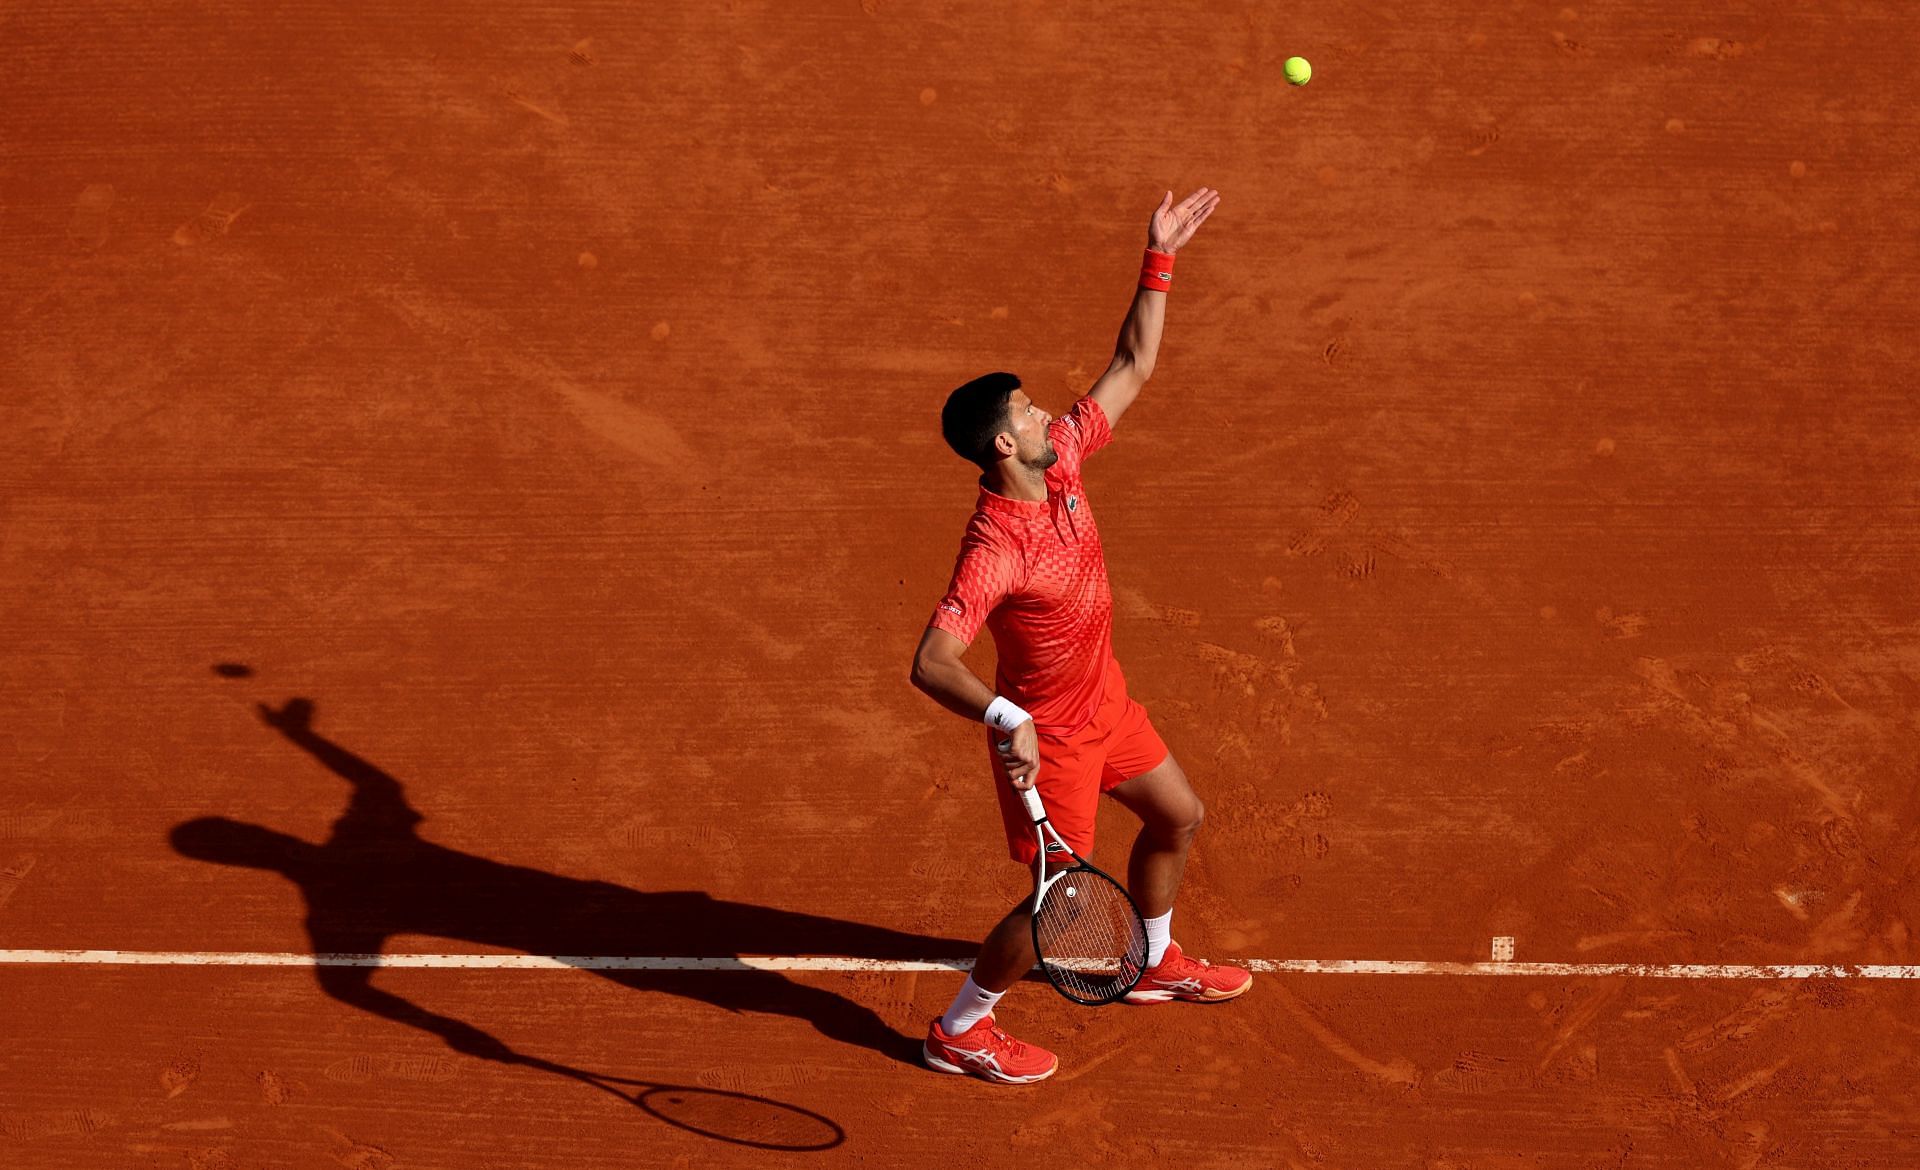 Novak Djokovic in action at the Monte-Carlo Masters